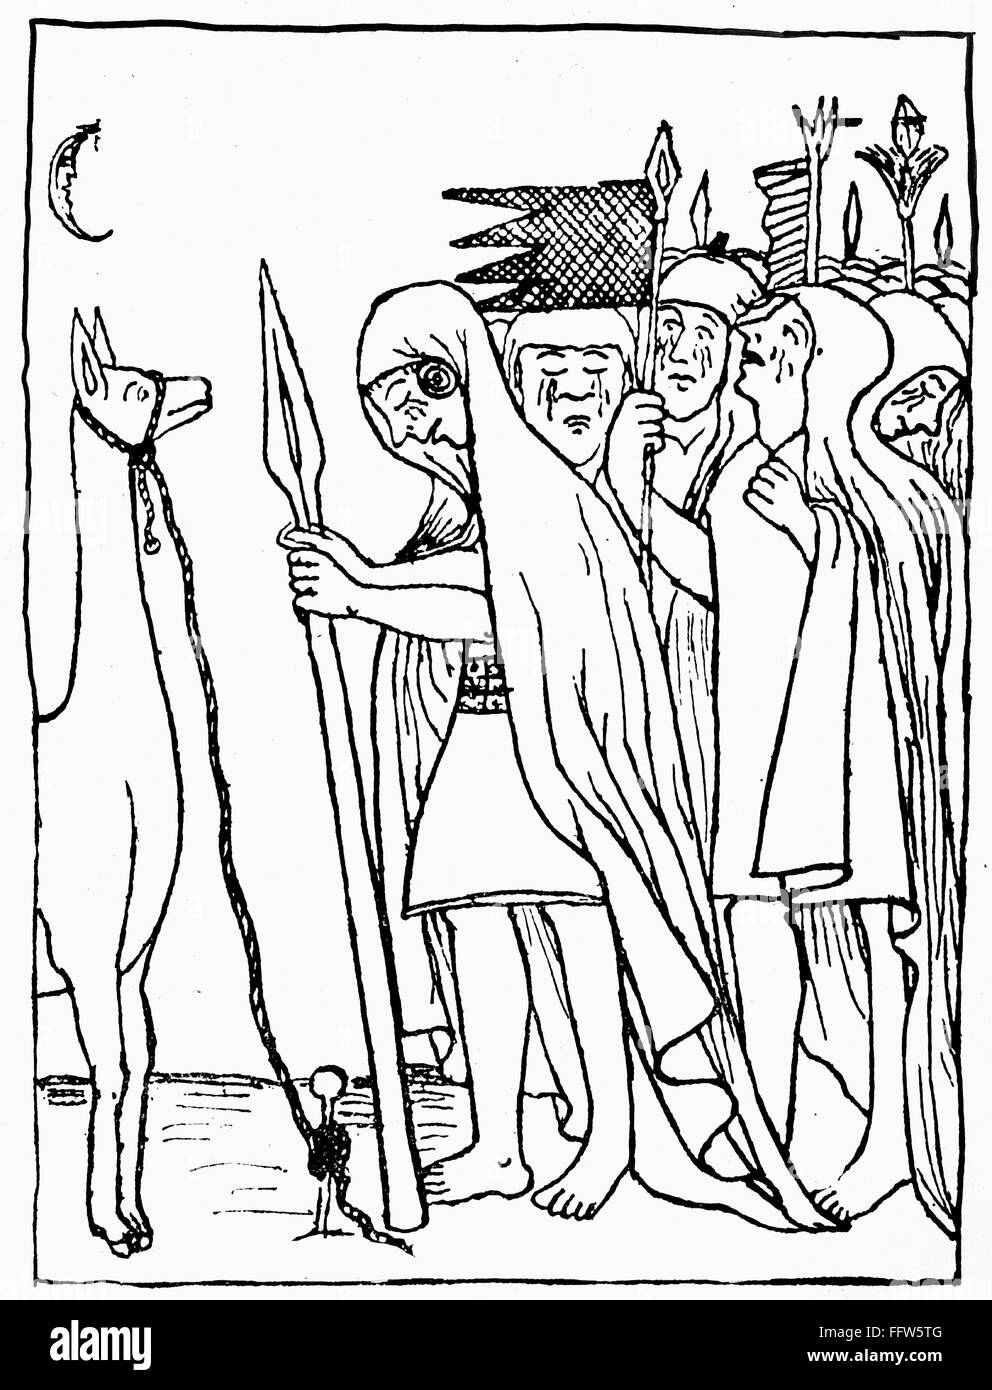 INCA EMPIRE: DEAD RULER. /nMourning the mummy of a dead ruler while sacrificing a white llama. Pen and ink drawing from 'El primer nueva cronica y buen gobierno' (the first chronicle and good government), 1583-1615, by Felipe Guaman Poma de Ayala. Stock Photo